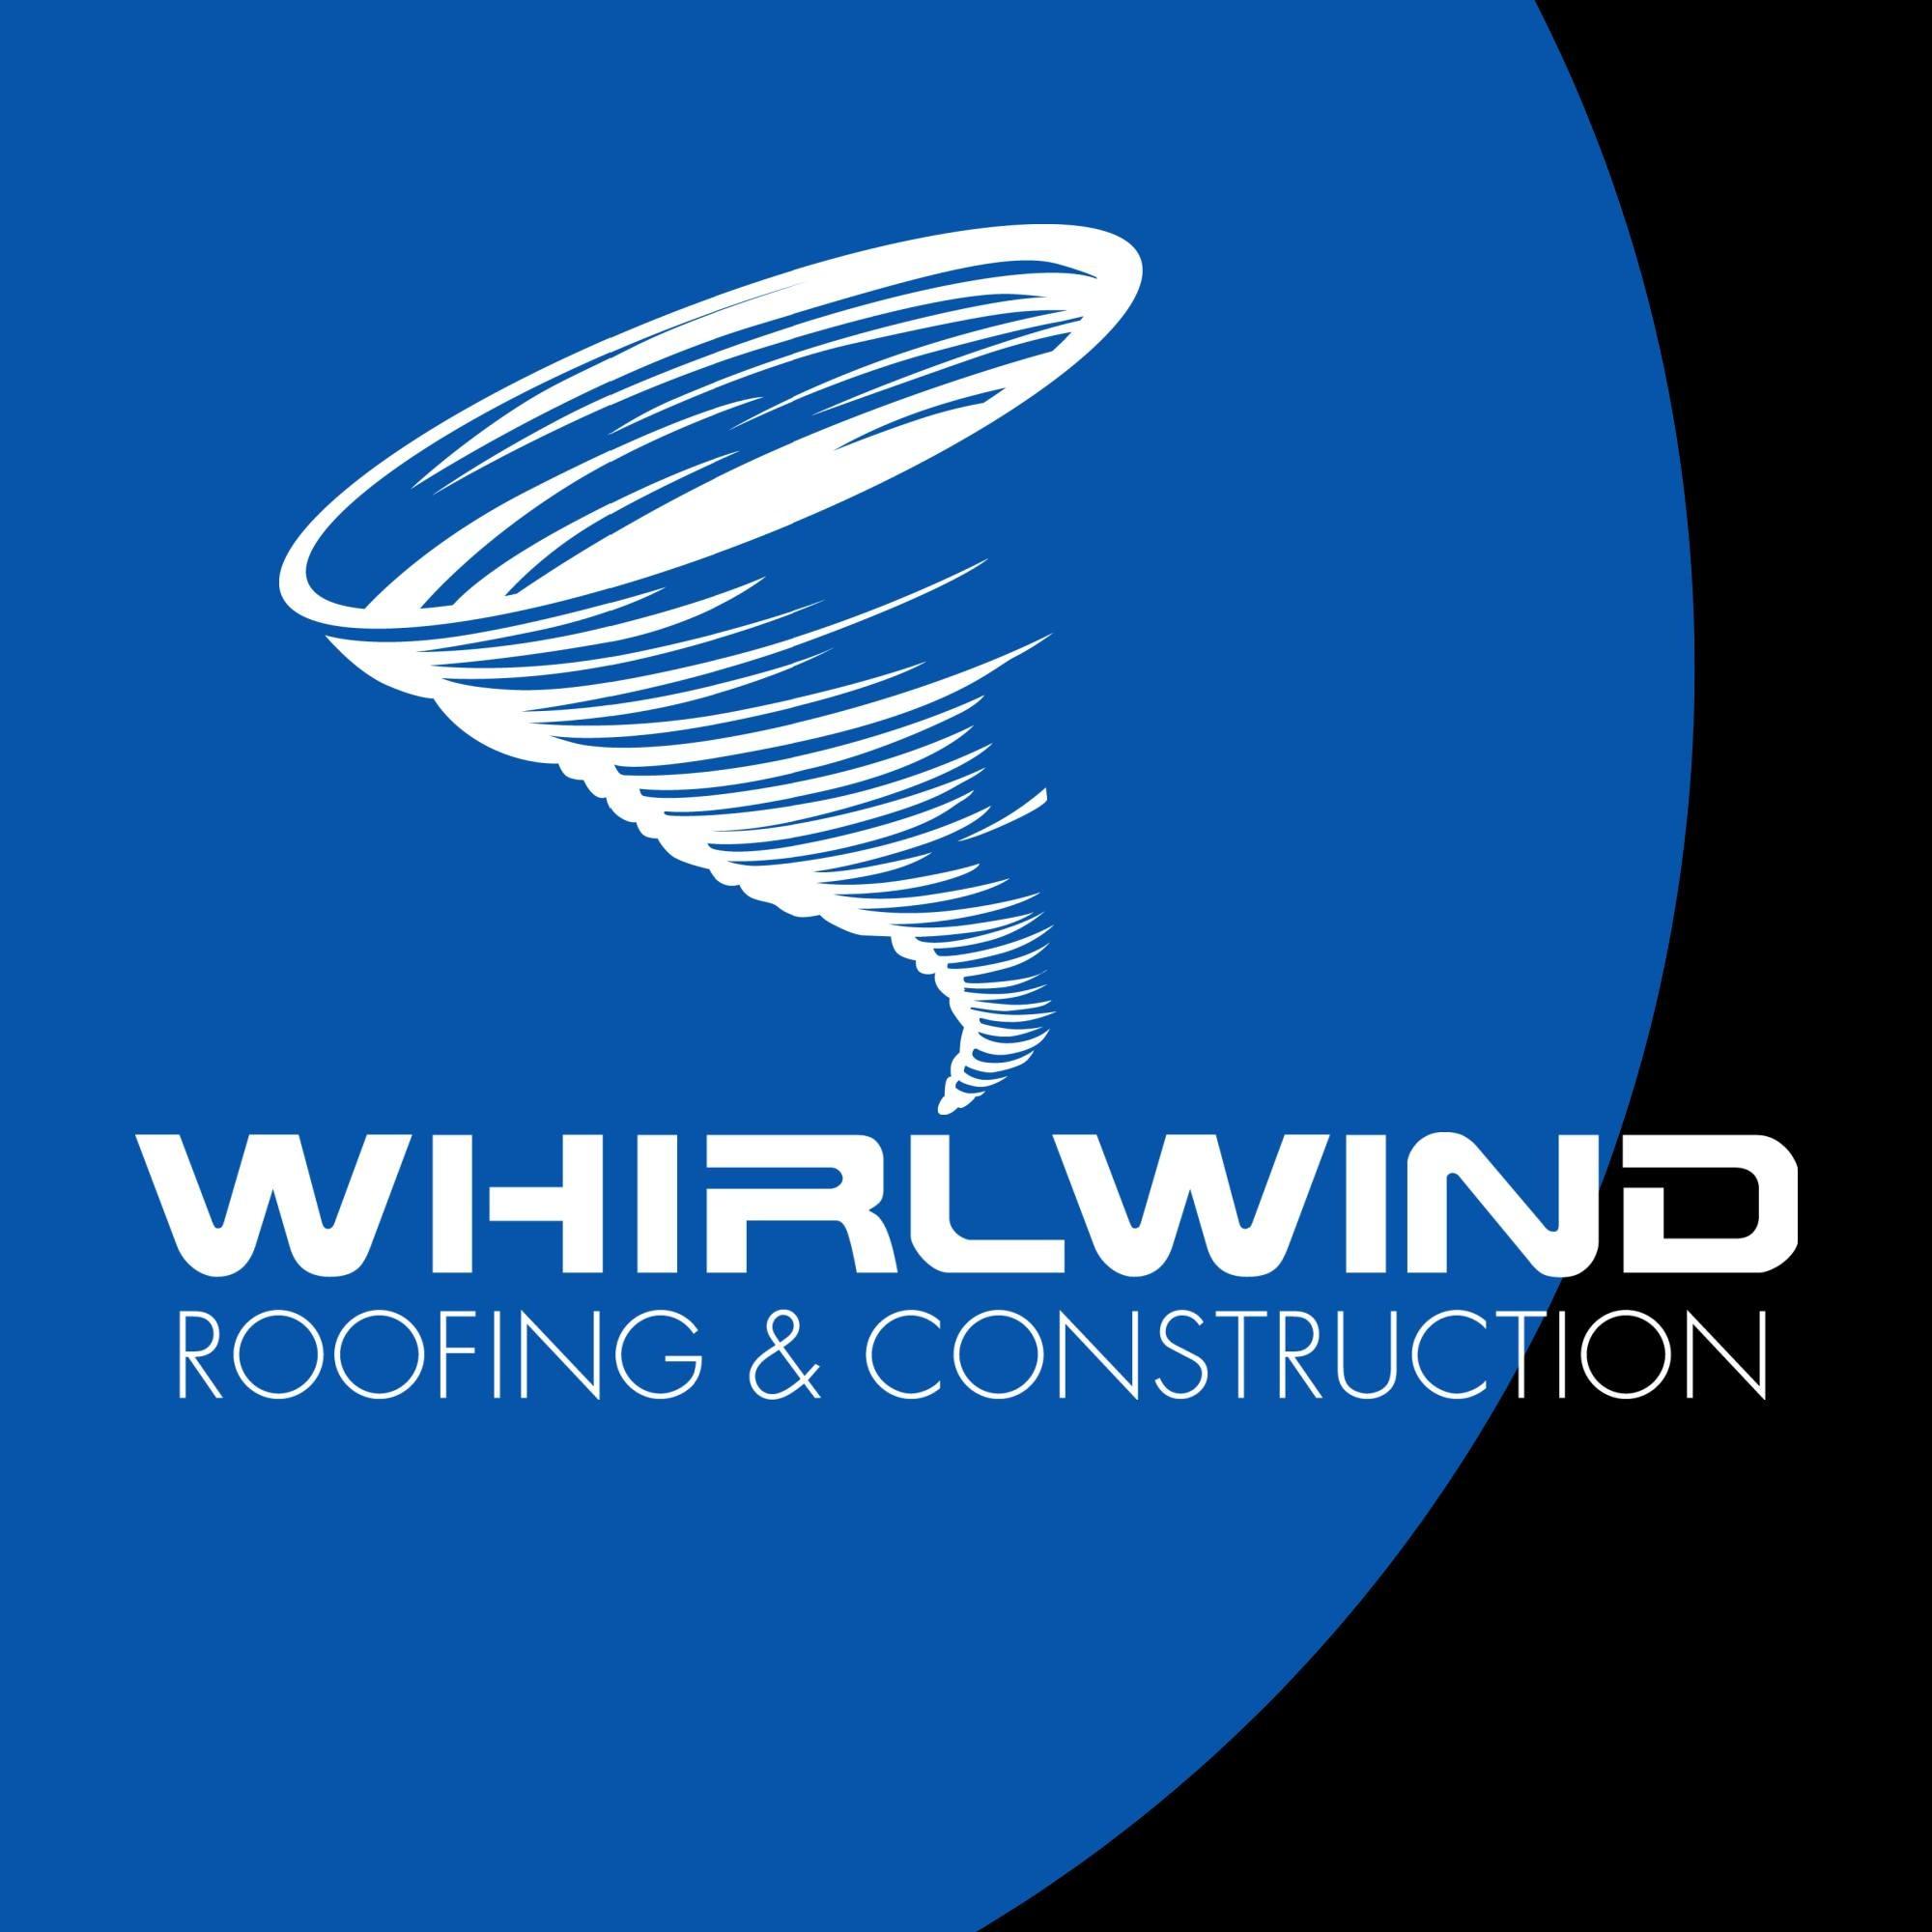 Whirlwind Roofing and Construction, LLC